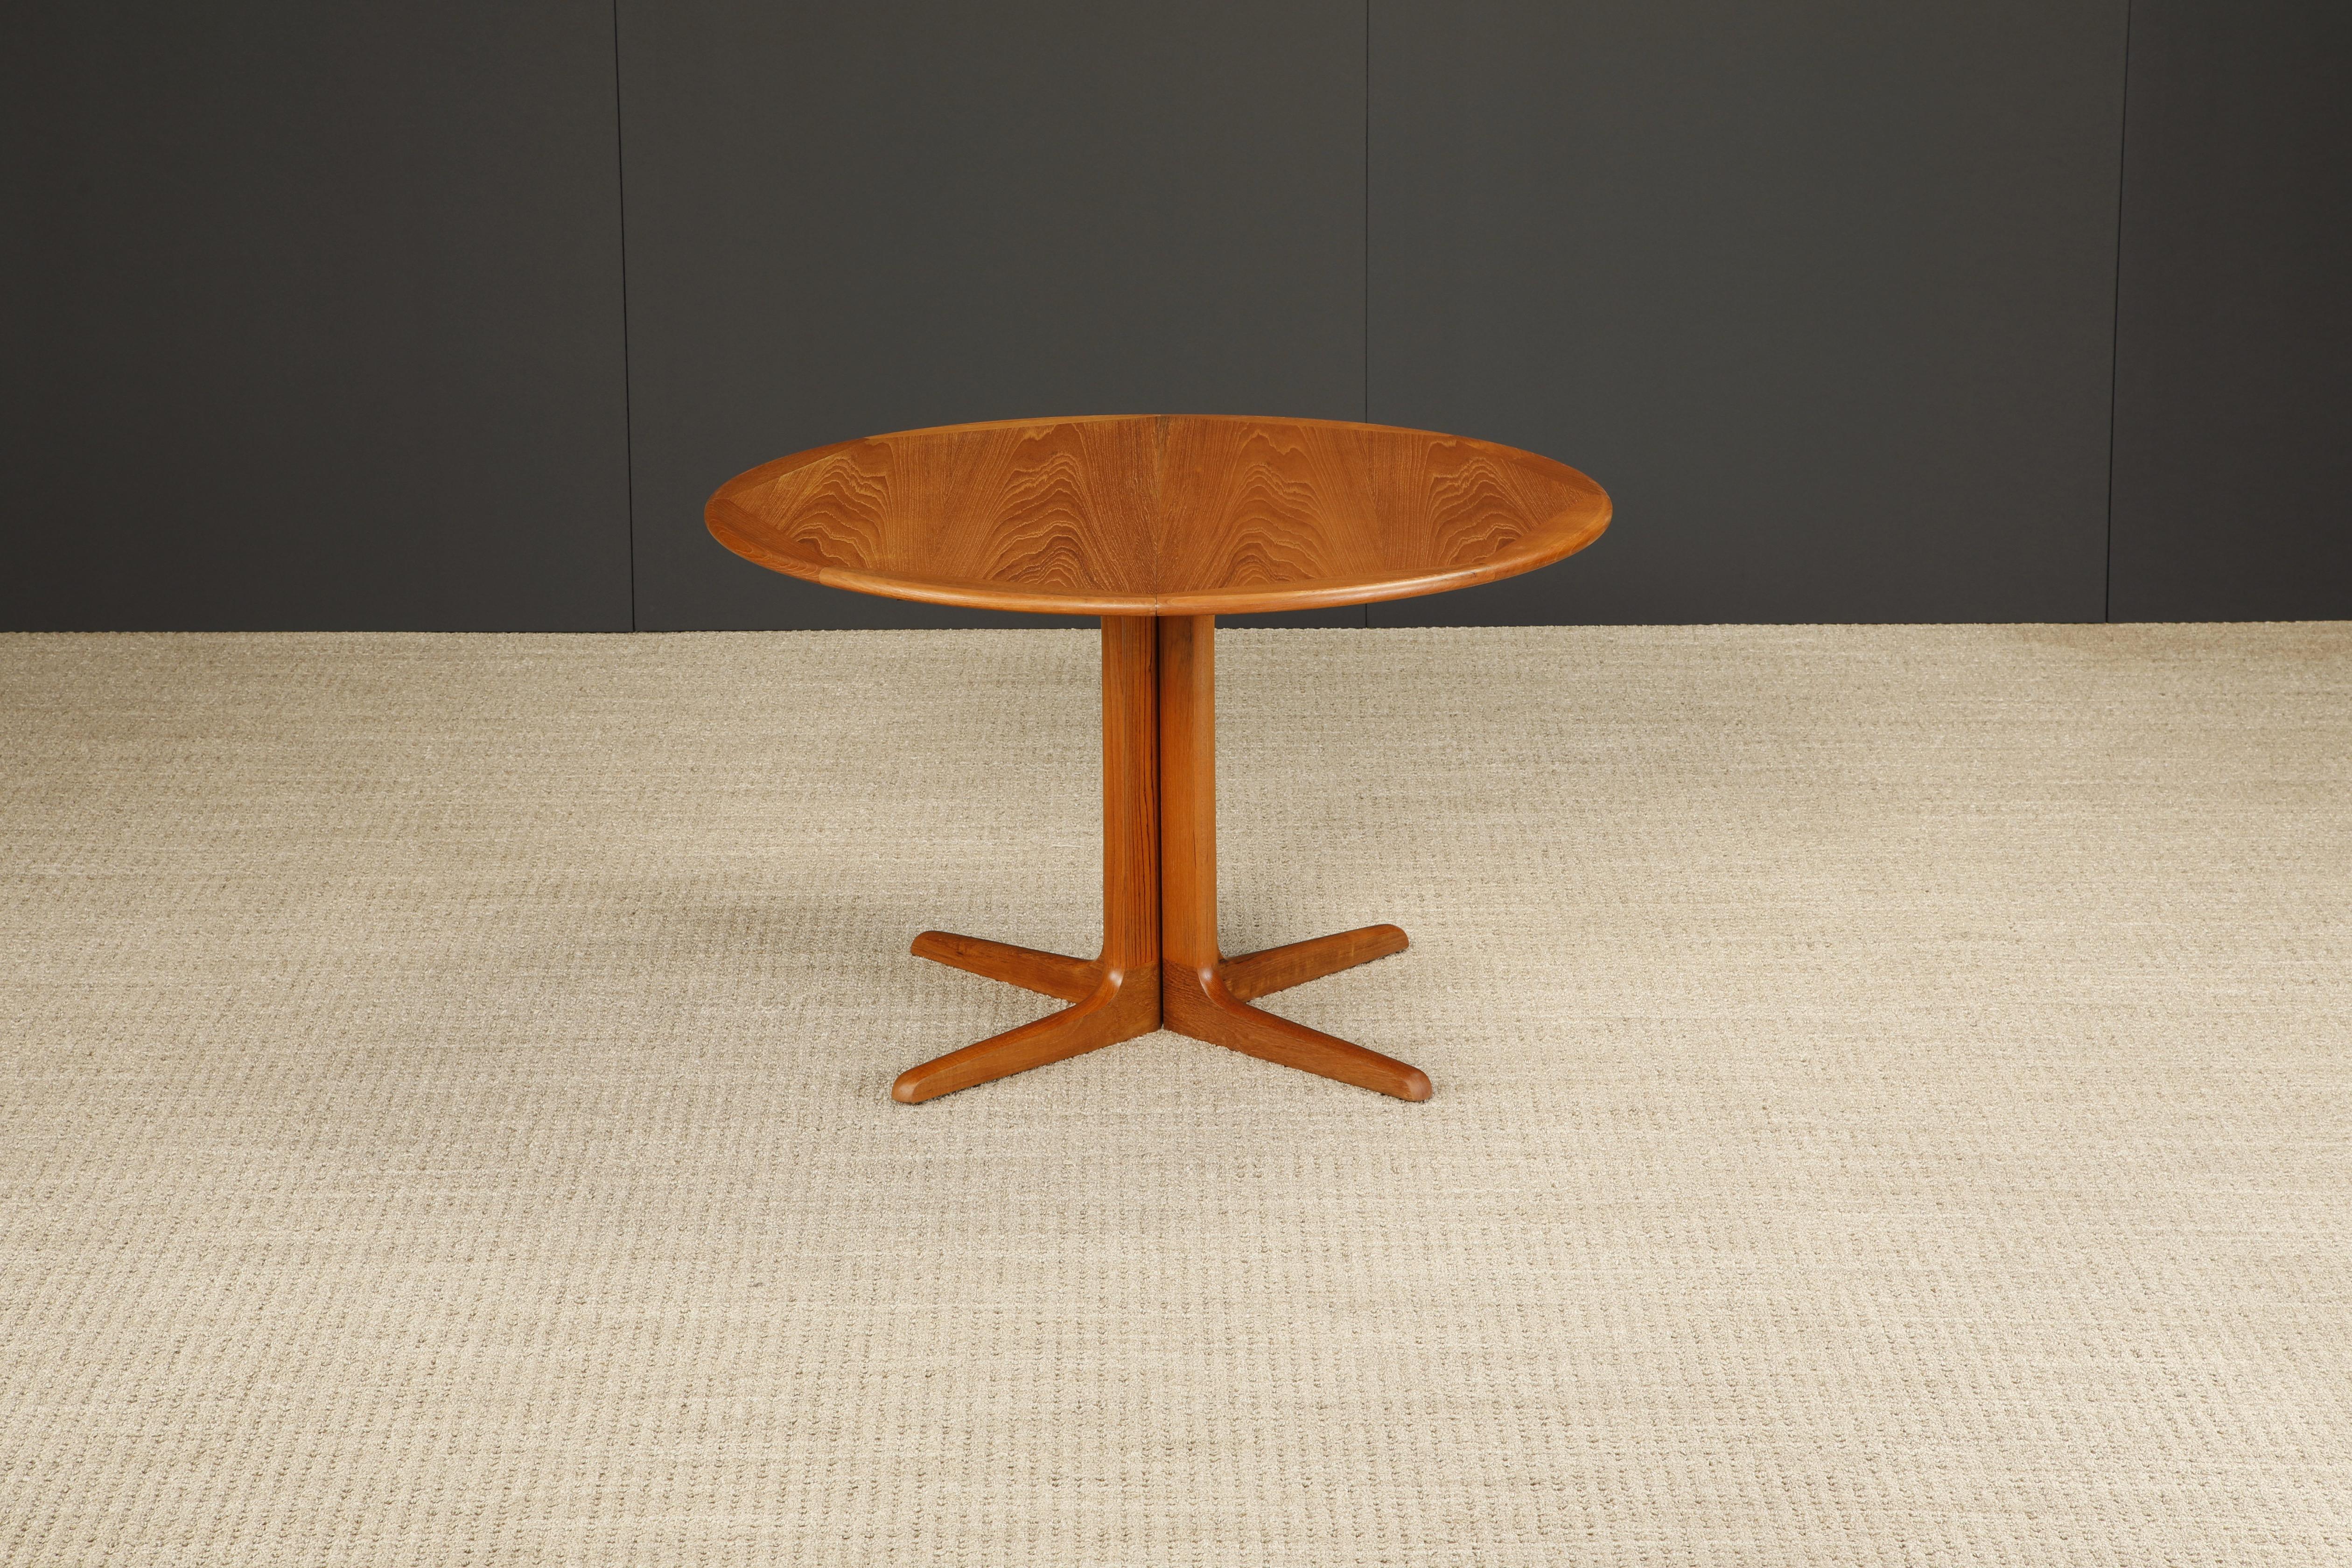 This beautiful and charming Danish Modern dining table comes with two leaves and can extend from 45 inches to 85 inches. Produced by CFC Silkeborg in Denmark during the 1970s (signed with label underneath the table top), and just professionally